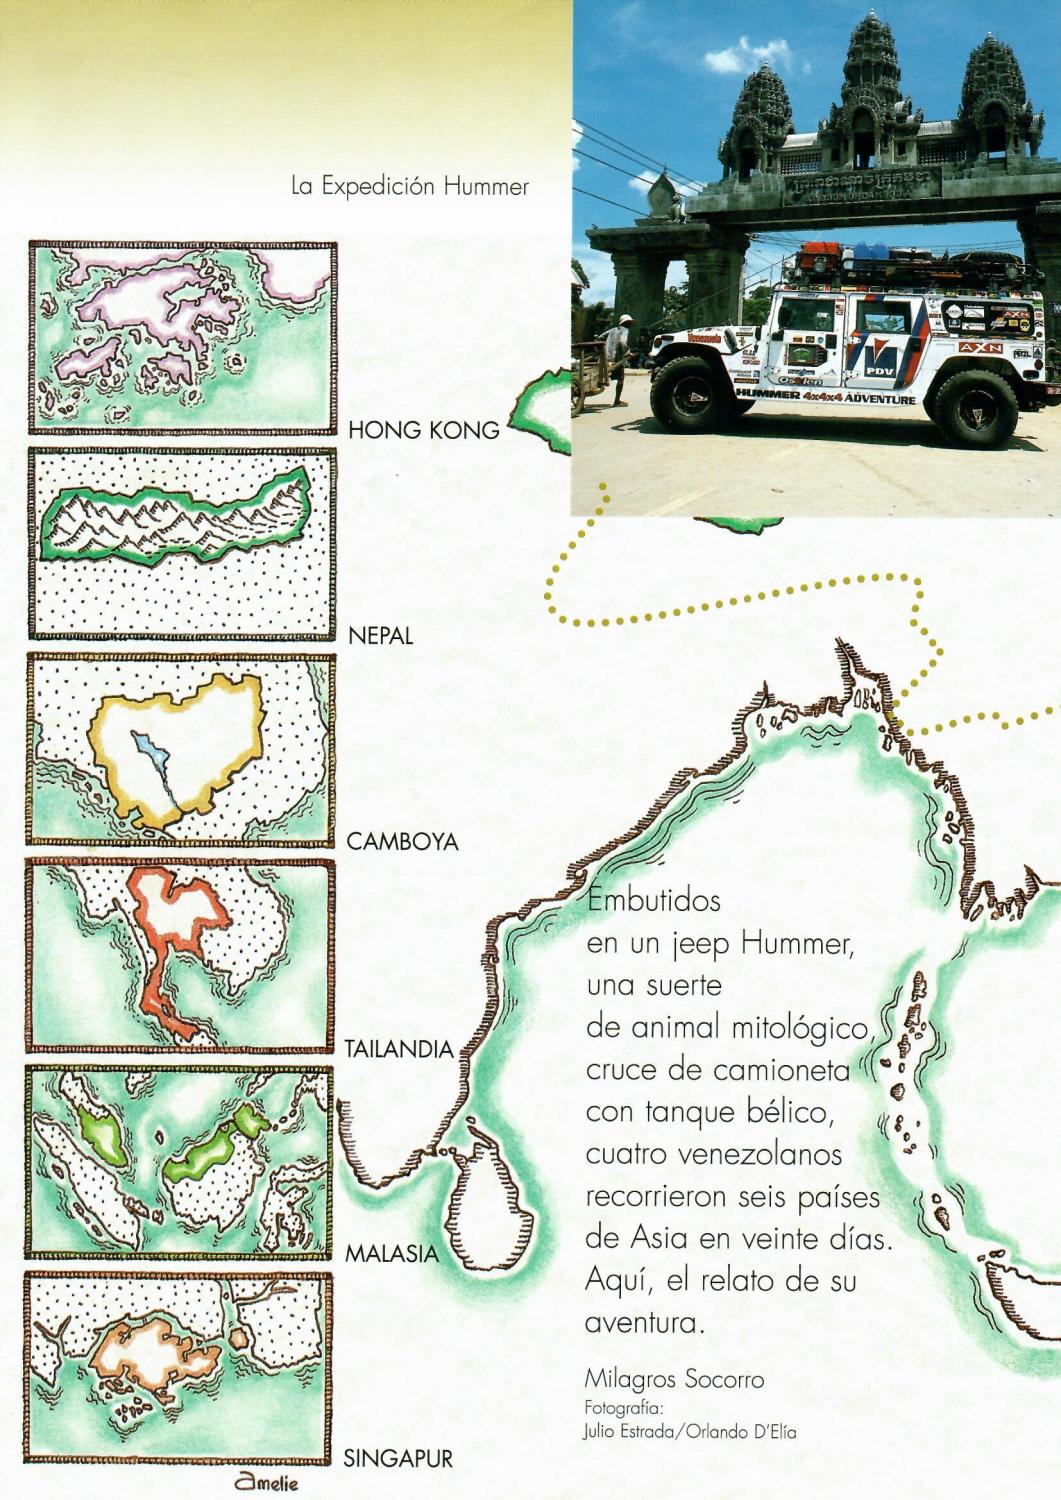 Hummer Expeditions